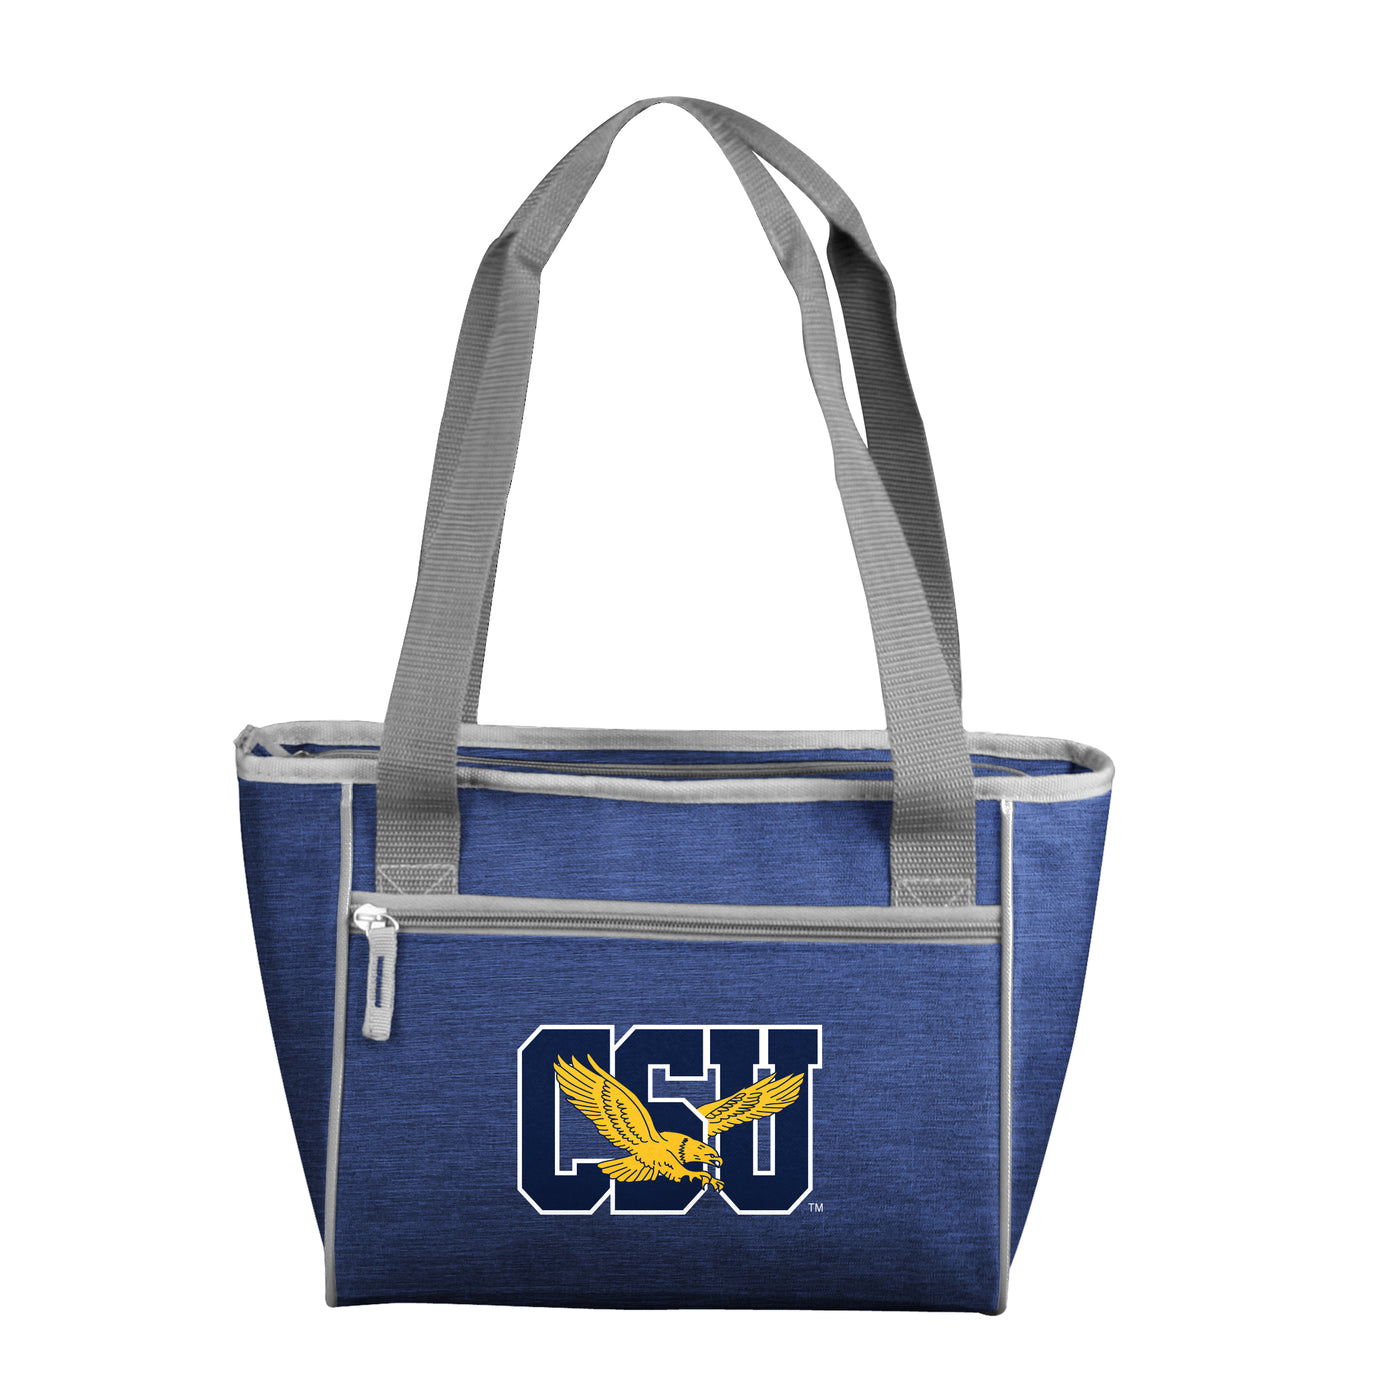 Coppin State 16 Can Cooler Tote